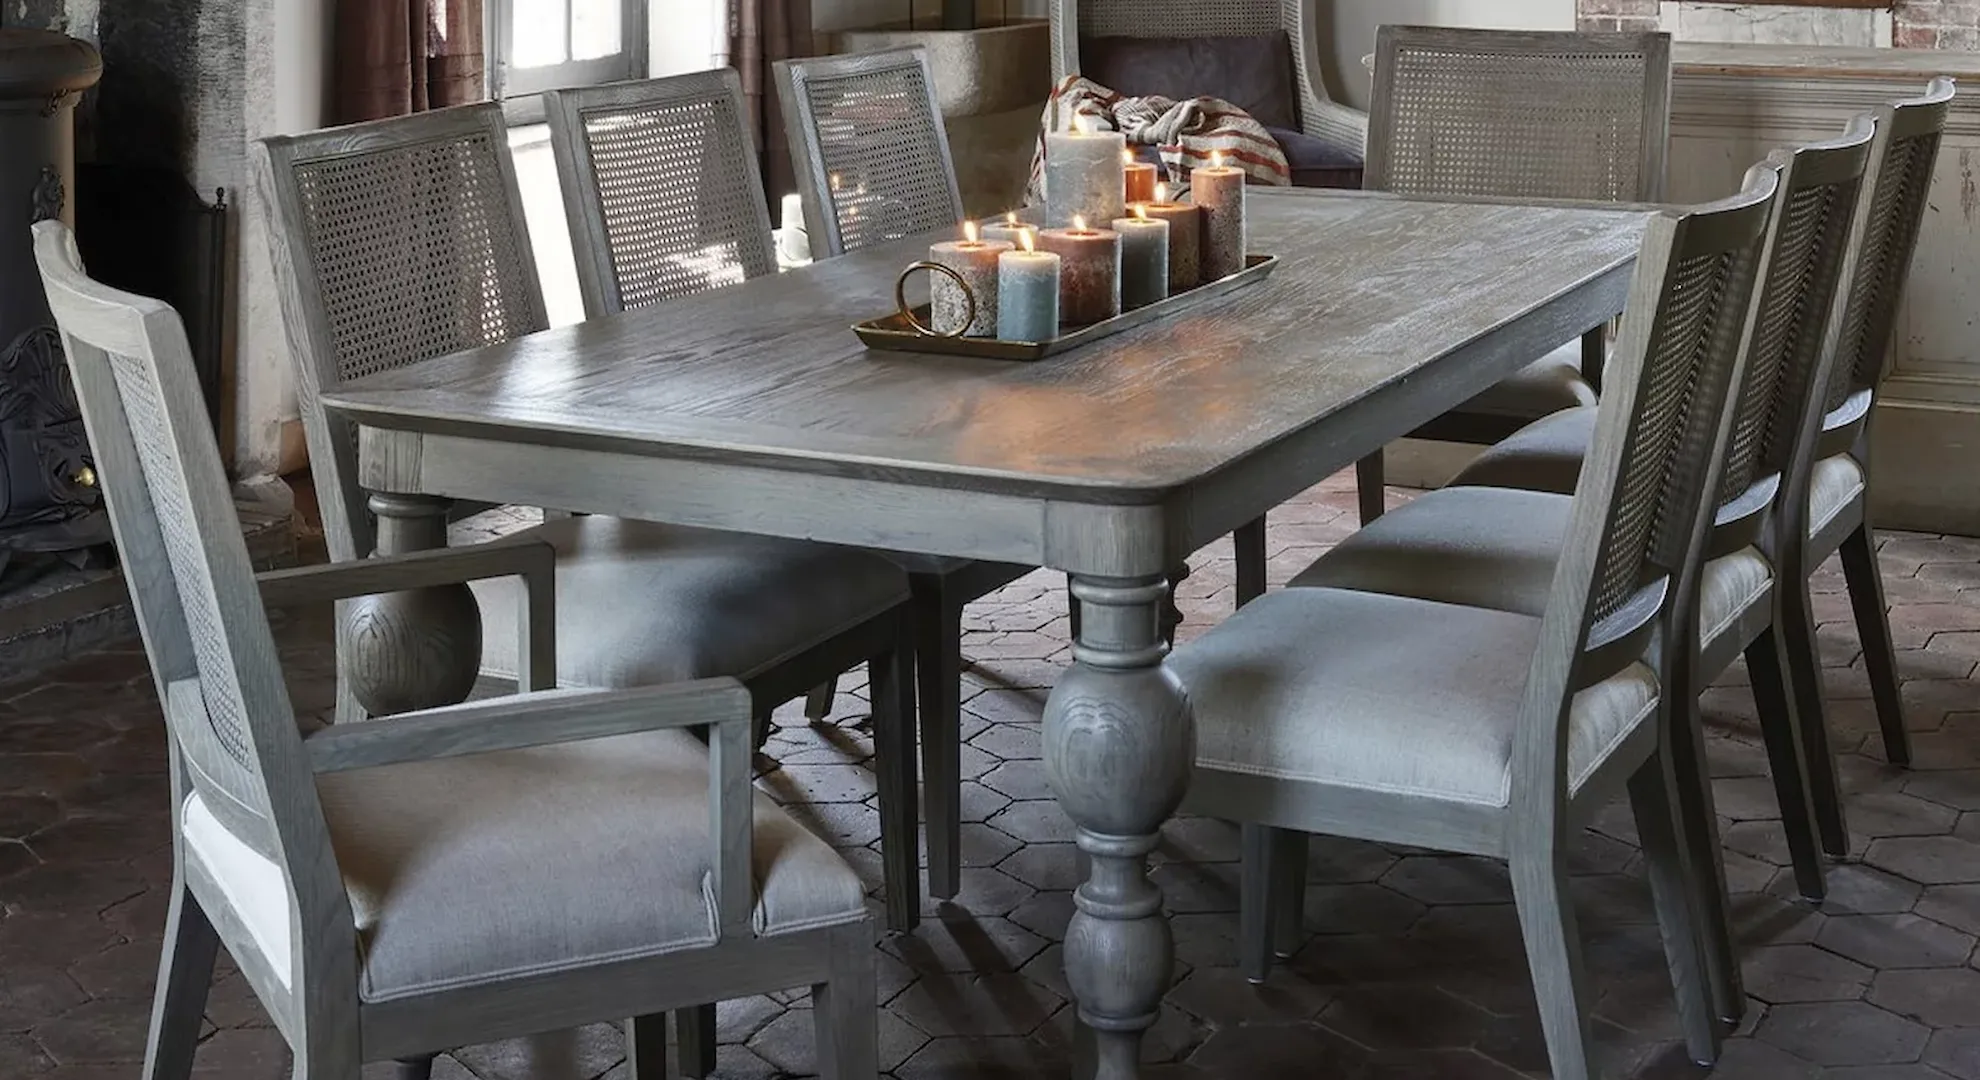 Buy The Perfect Tables for your Algarve home with Oliveira's furniture collection